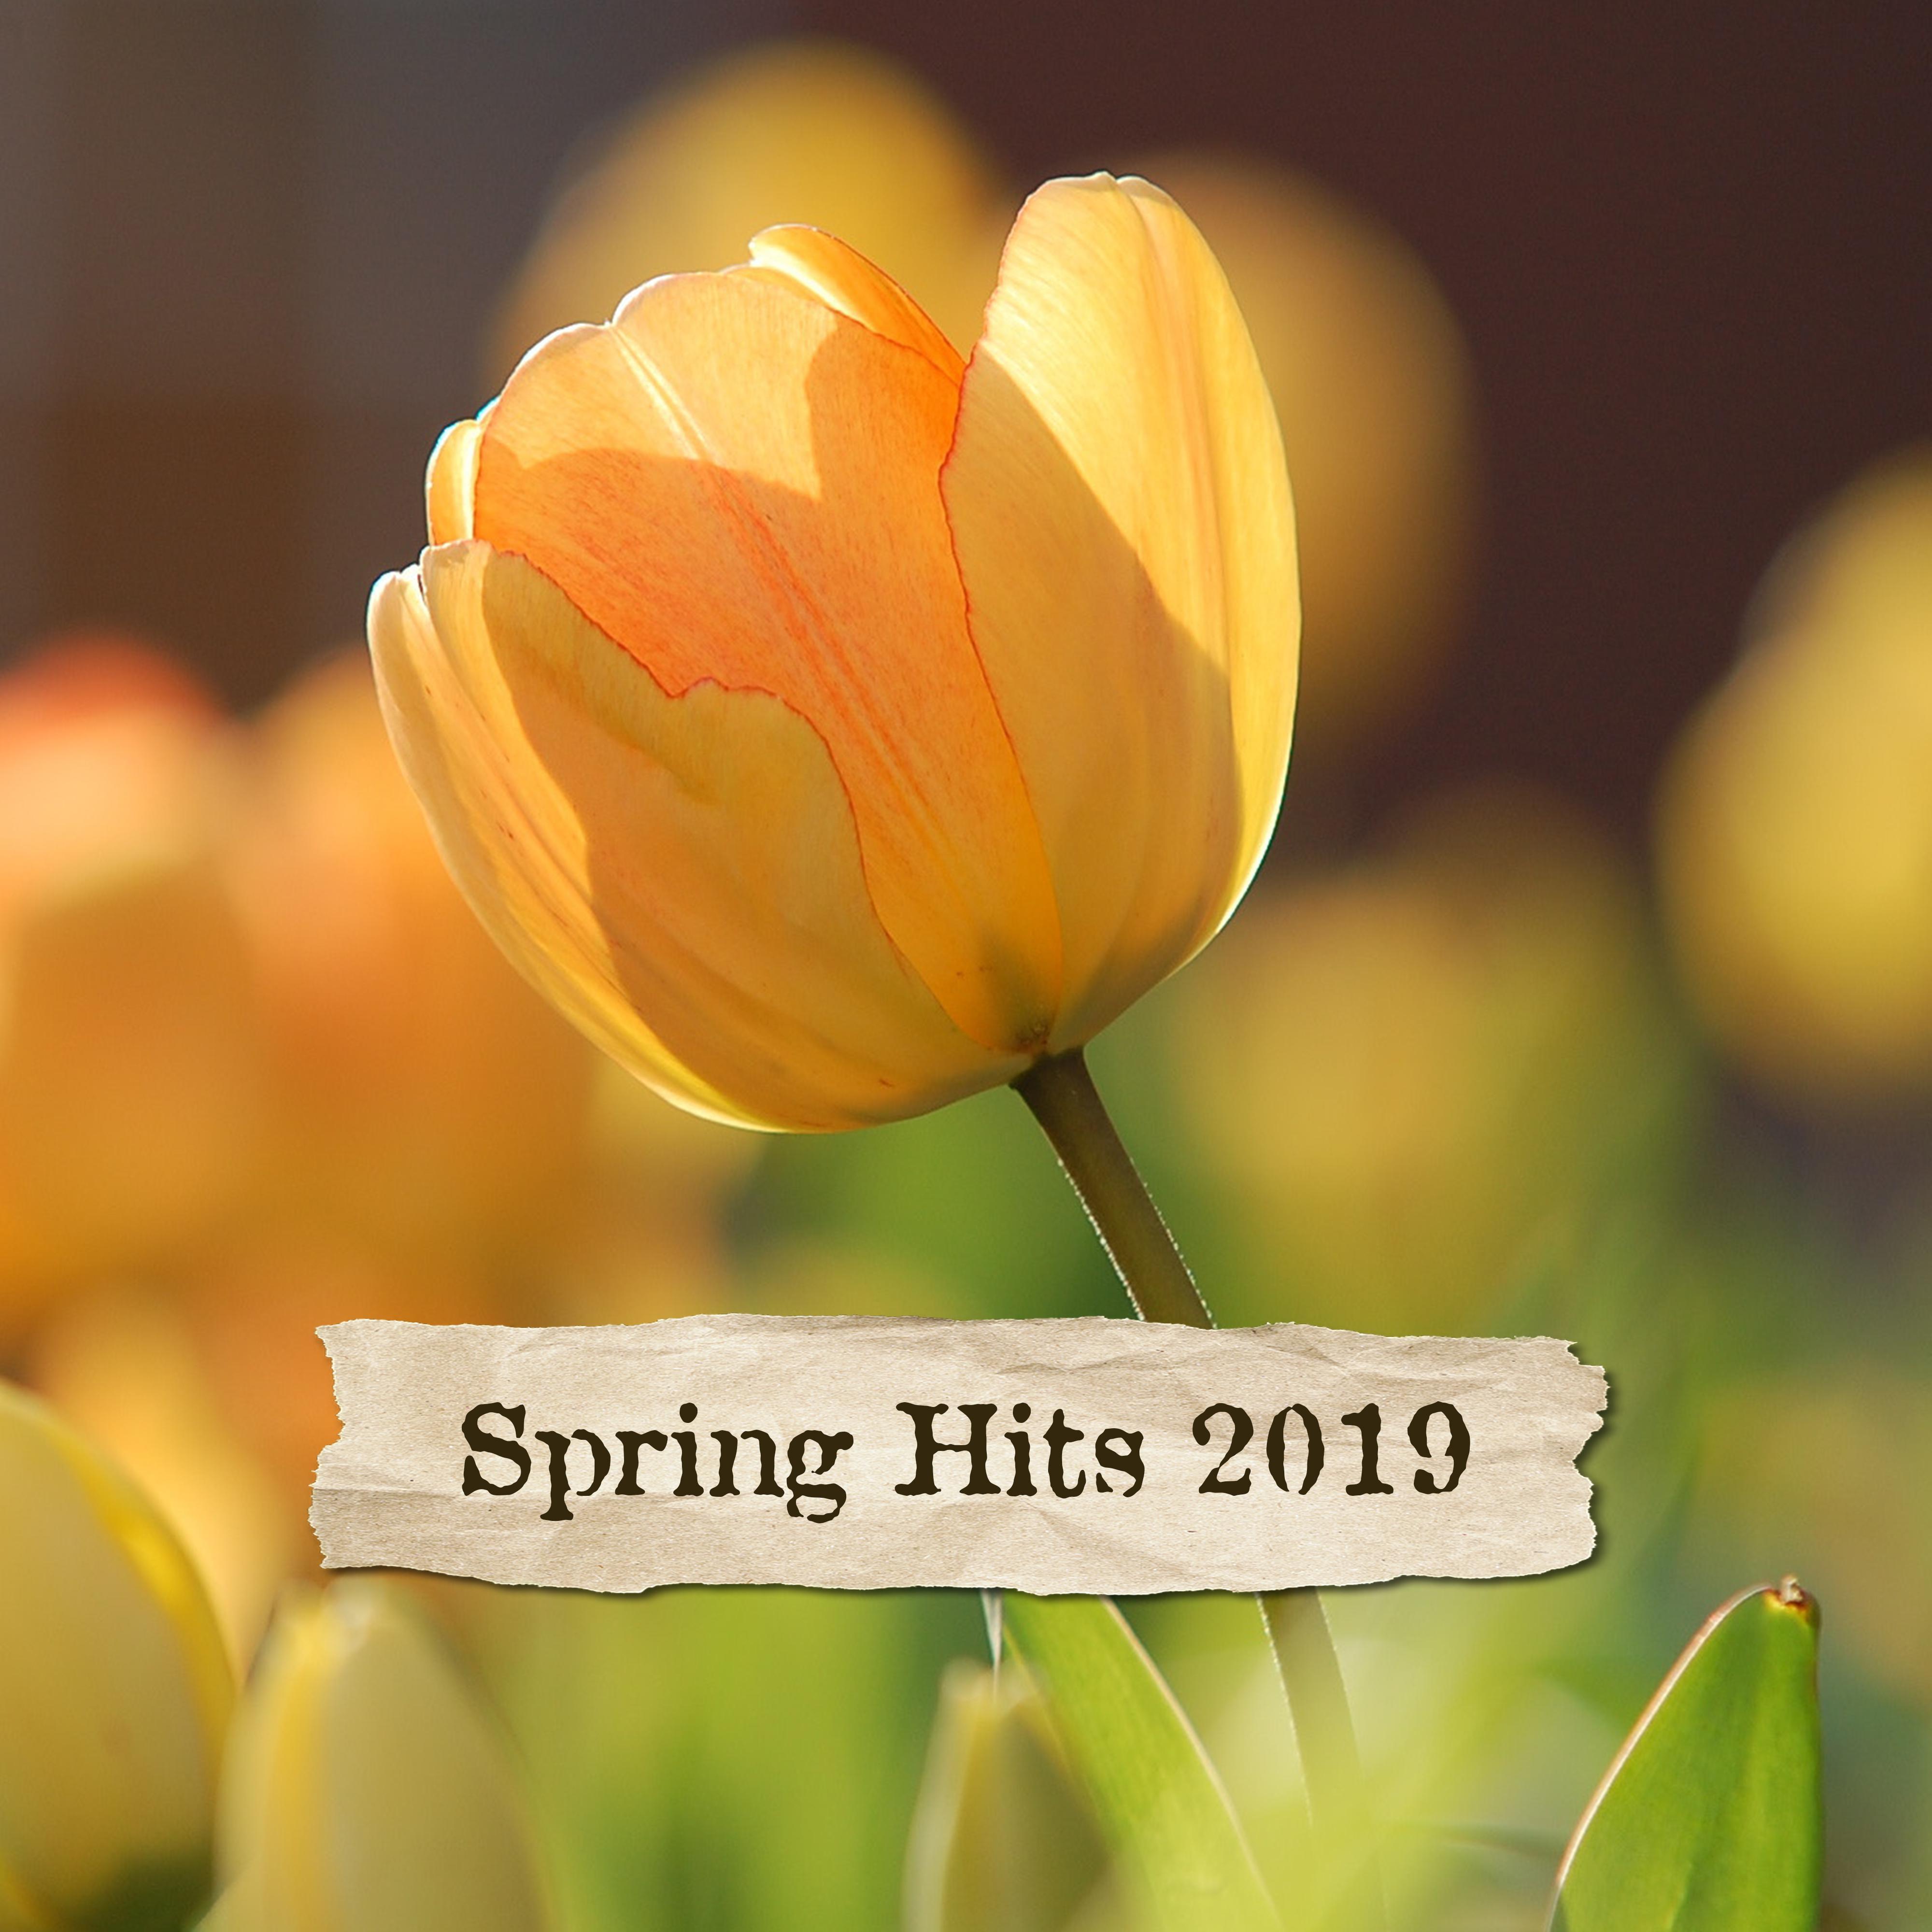 Spring Hits 2019 – Best Chill Out 2019, Relaxing Vibes, Deep Chill, Zero Stress, Chillout Collection for Relaxation